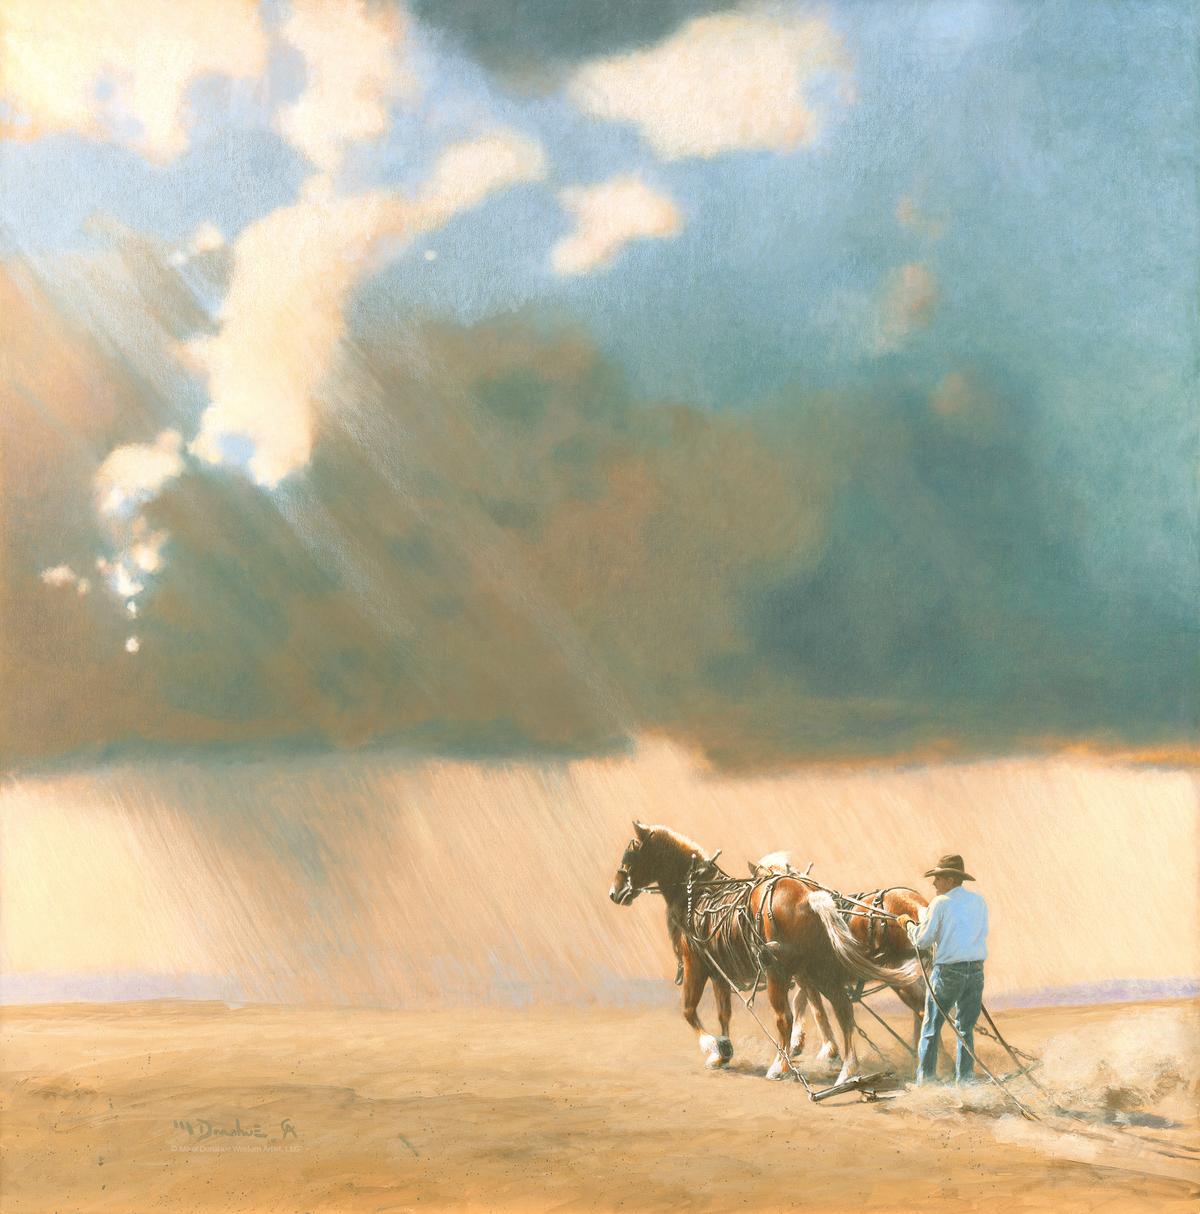 "Panhandle Summer" by Mikel Donahue. (Courtesy of <a href="http://www.mikeldonahue.com/">Mikel Donahue</a>)